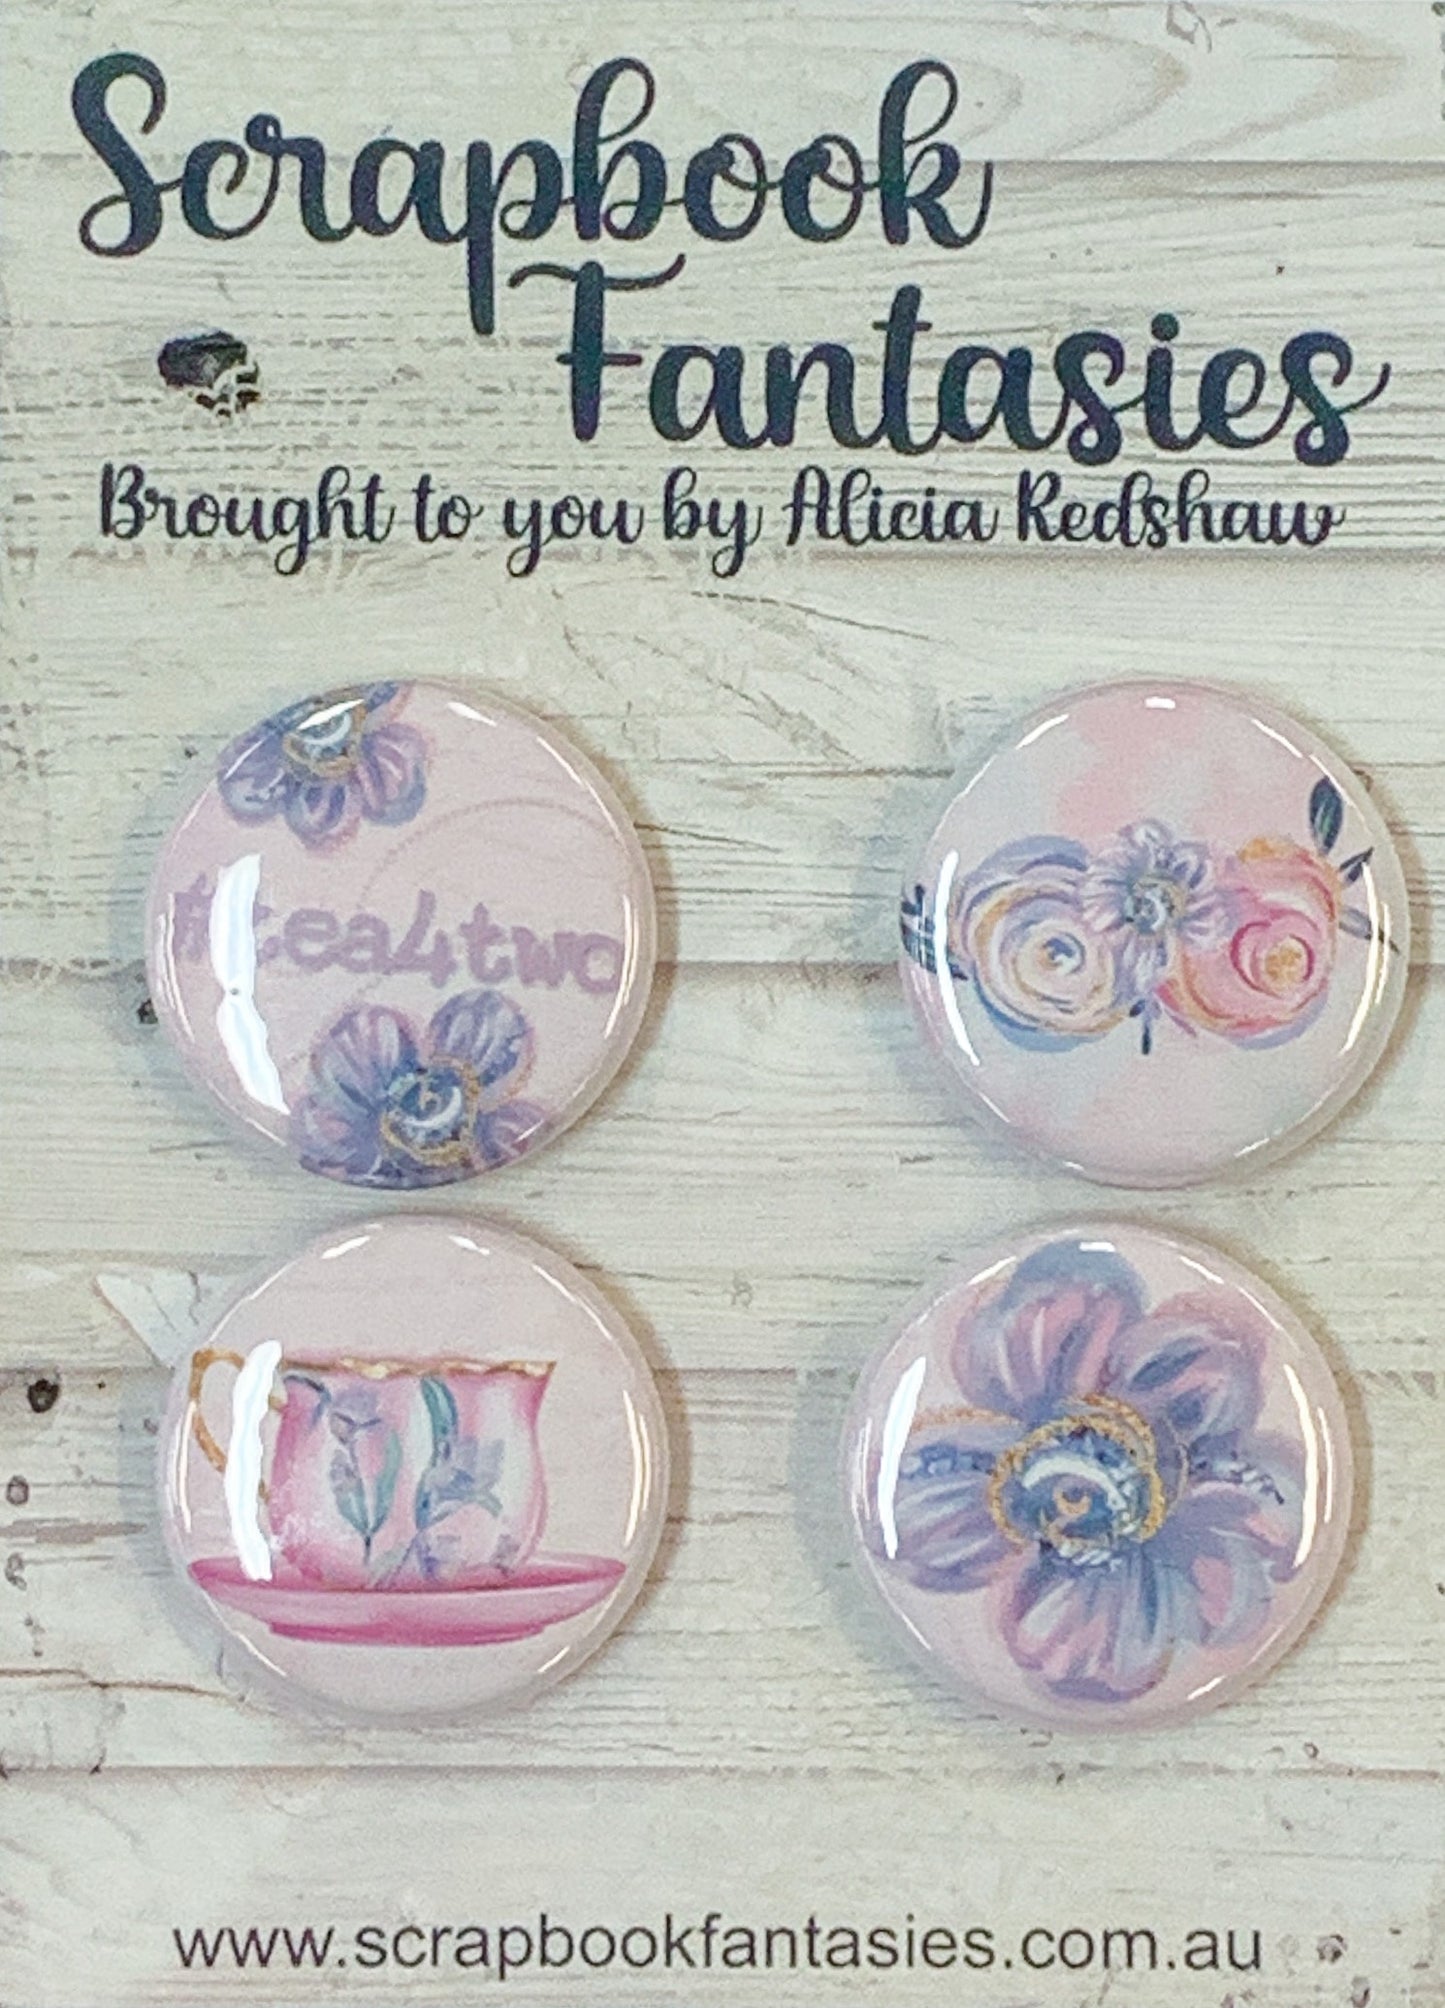 Springtime Tea Party Flair Buttons [1"] - #tea4two (4 pieces) Designed by Alicia Redshaw Exclusively for Scrapbook Fantasies